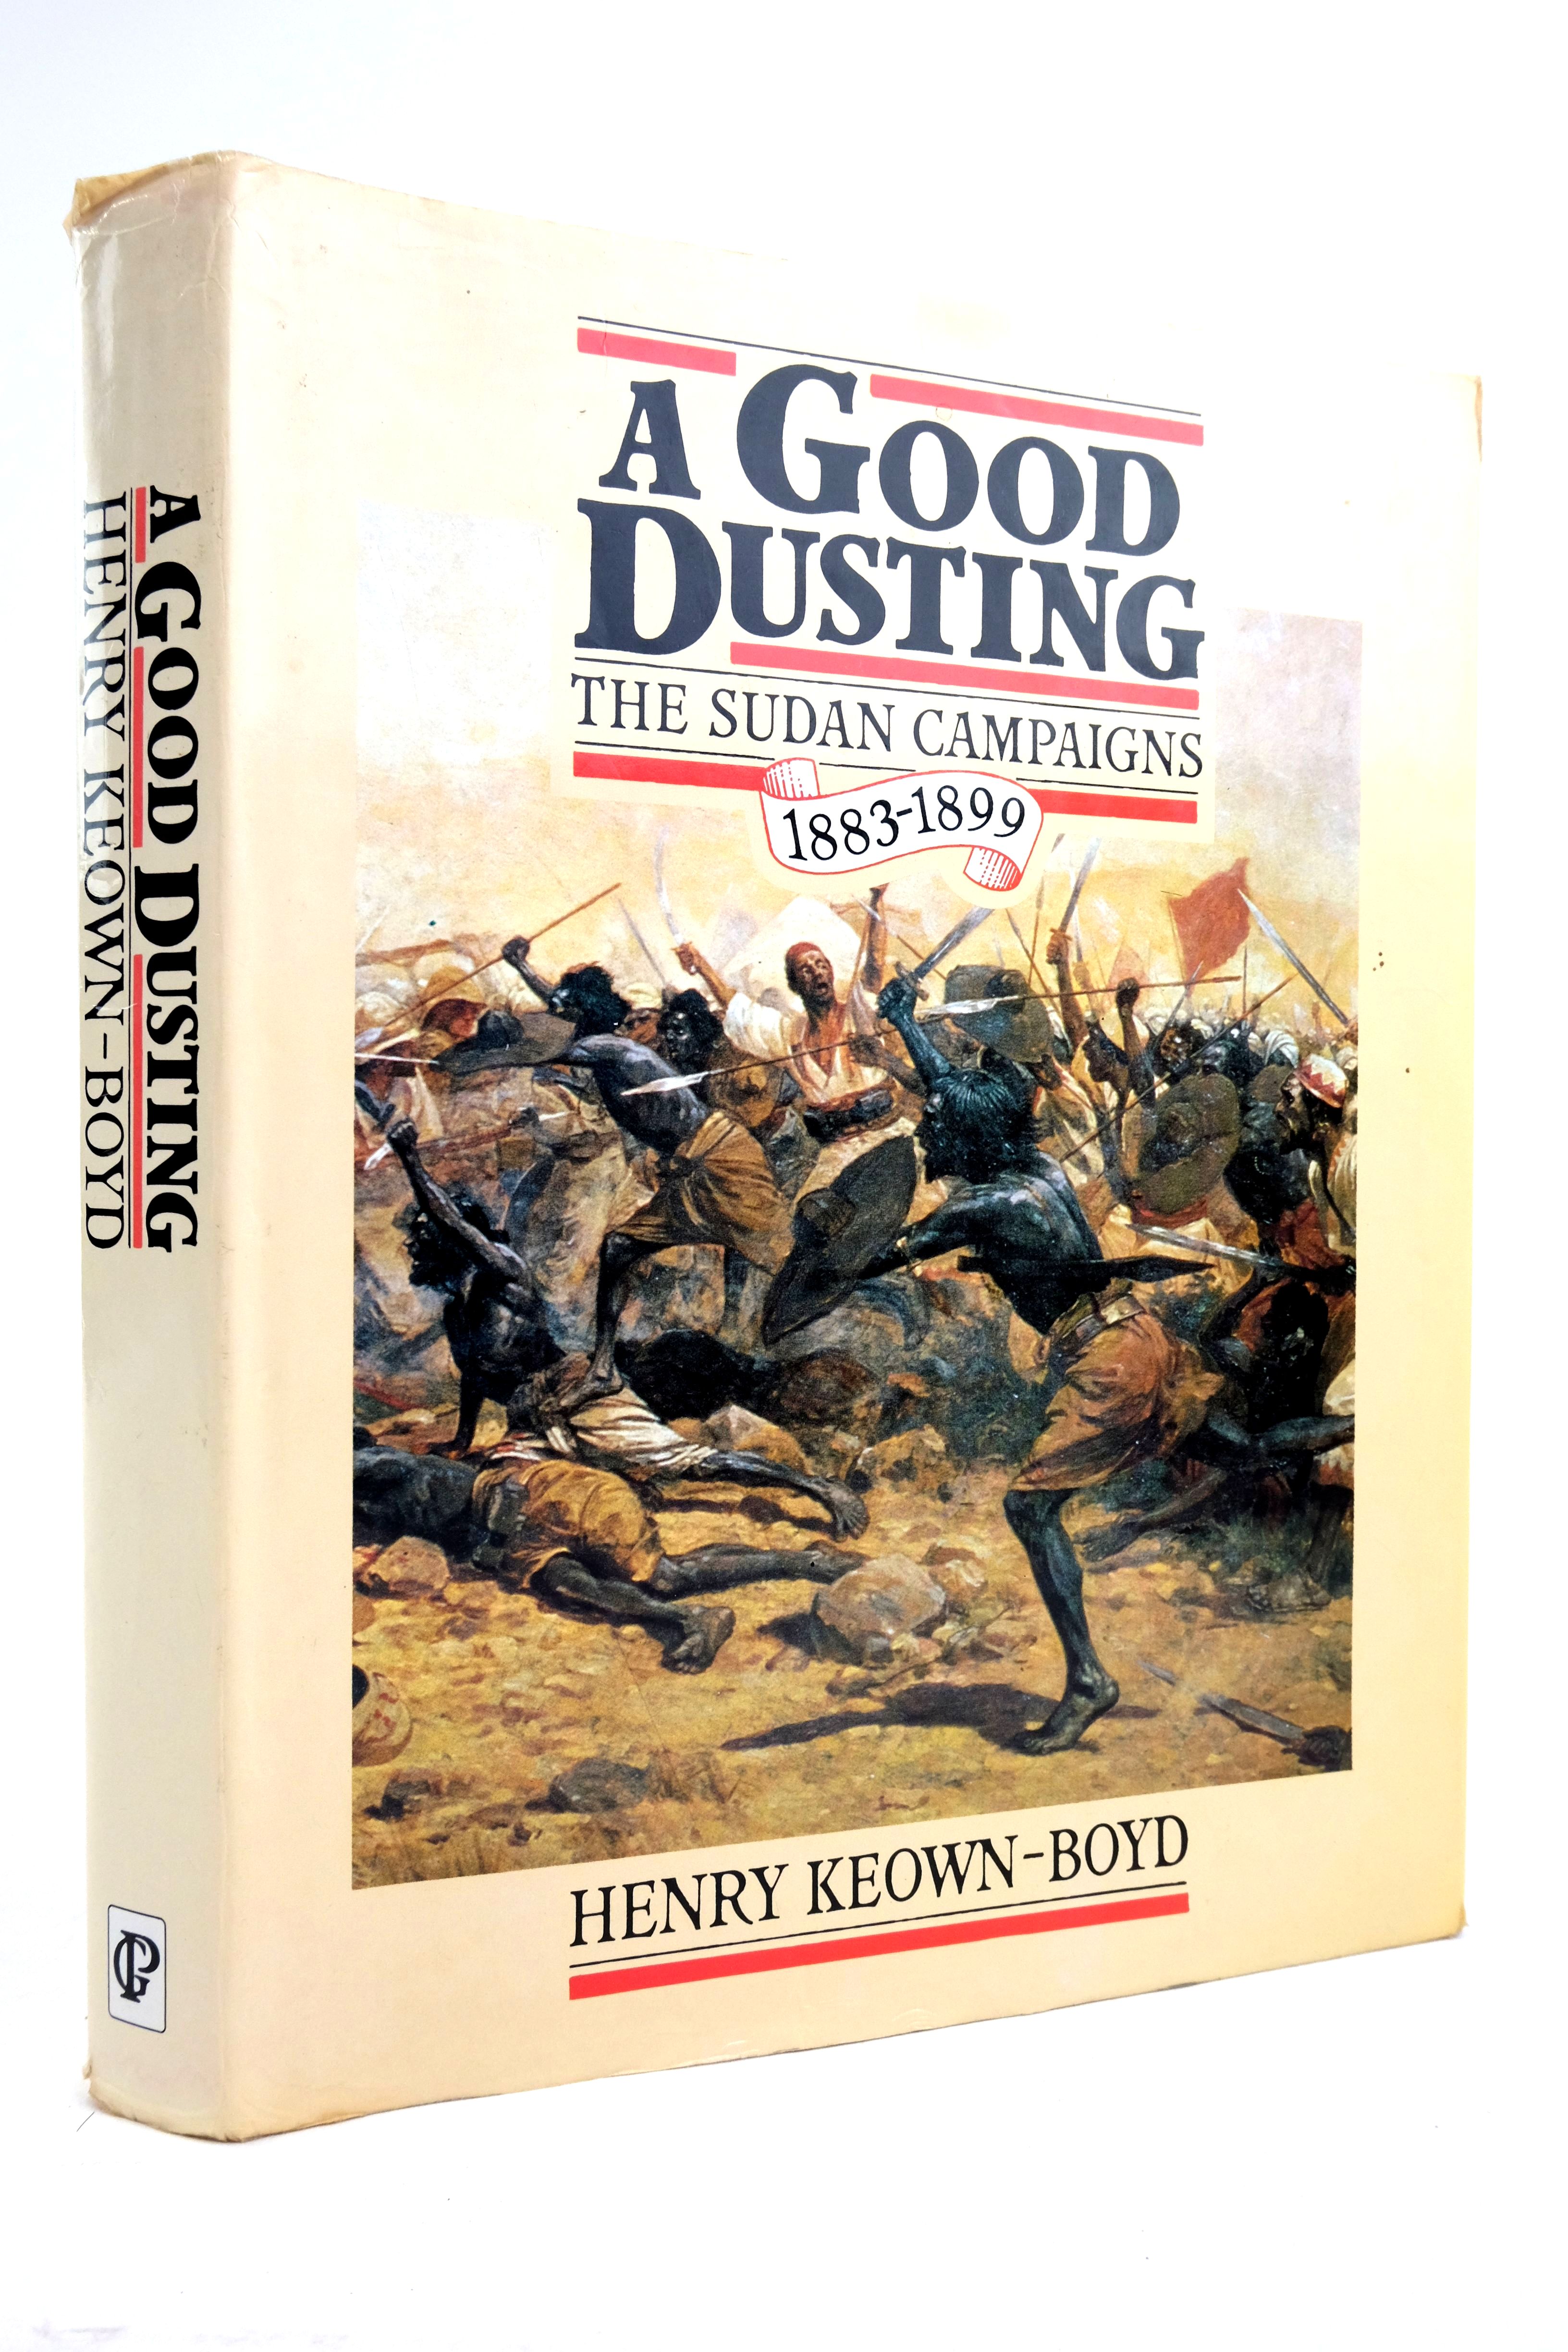 Photo of A GOOD DUSTING: THE SUDAN CAMPAIGNS 1883 - 1899 written by Keown-Boyd, Henry published by Guild Publishing (STOCK CODE: 2135530)  for sale by Stella & Rose's Books